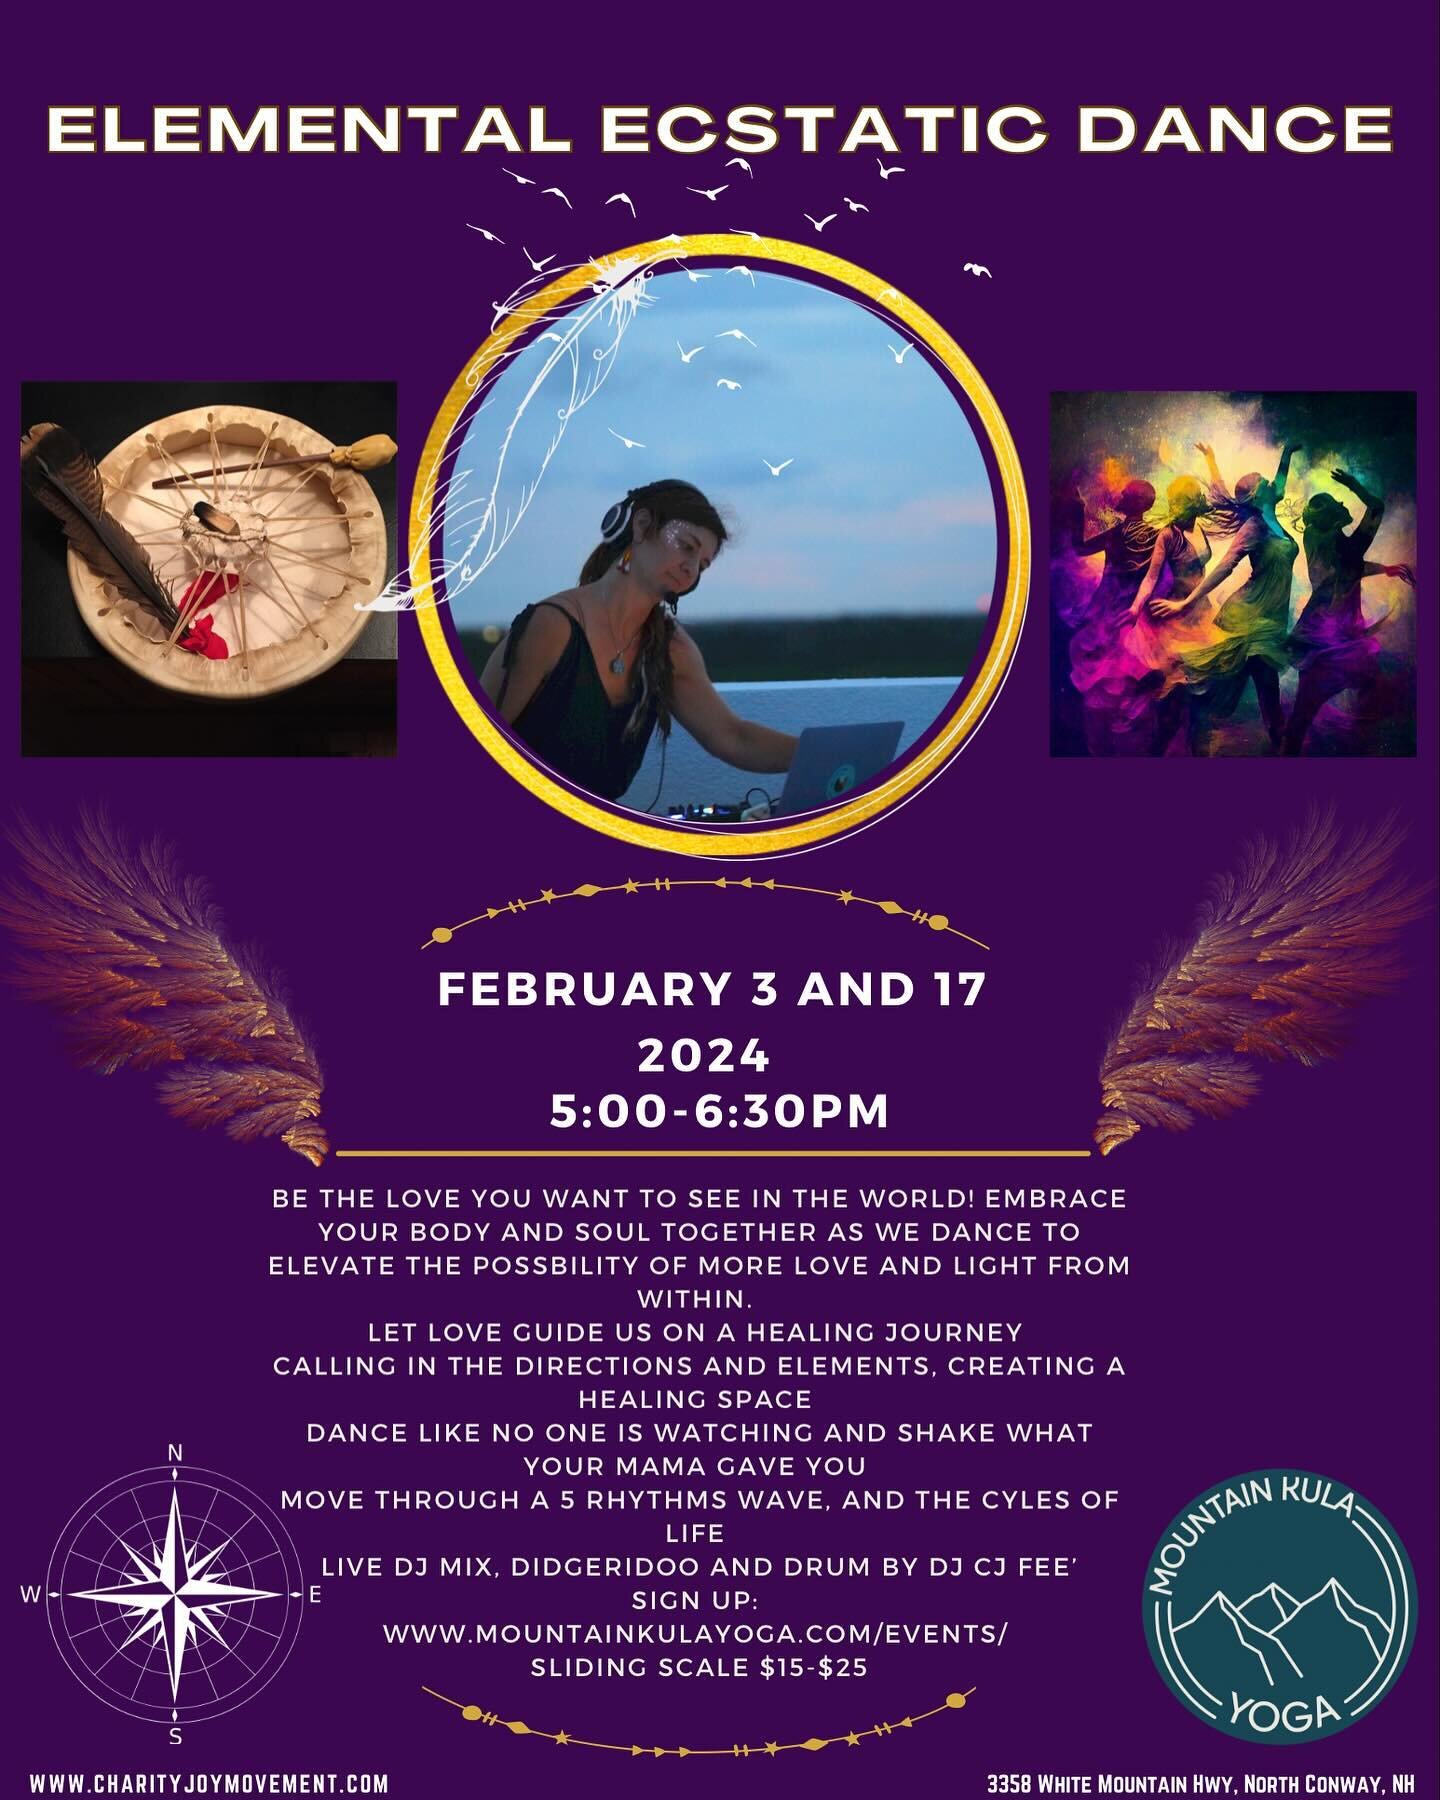 Keeping it going in the Valley. You requested more and we are doing just that. Twice a month @mountain_kula_yoga February 3 and 17th! Sign up @mountain_kula_yoga and let&rsquo;s Dance! #elementalecstaticdance #danceinthevalley #northconway #nowisthet